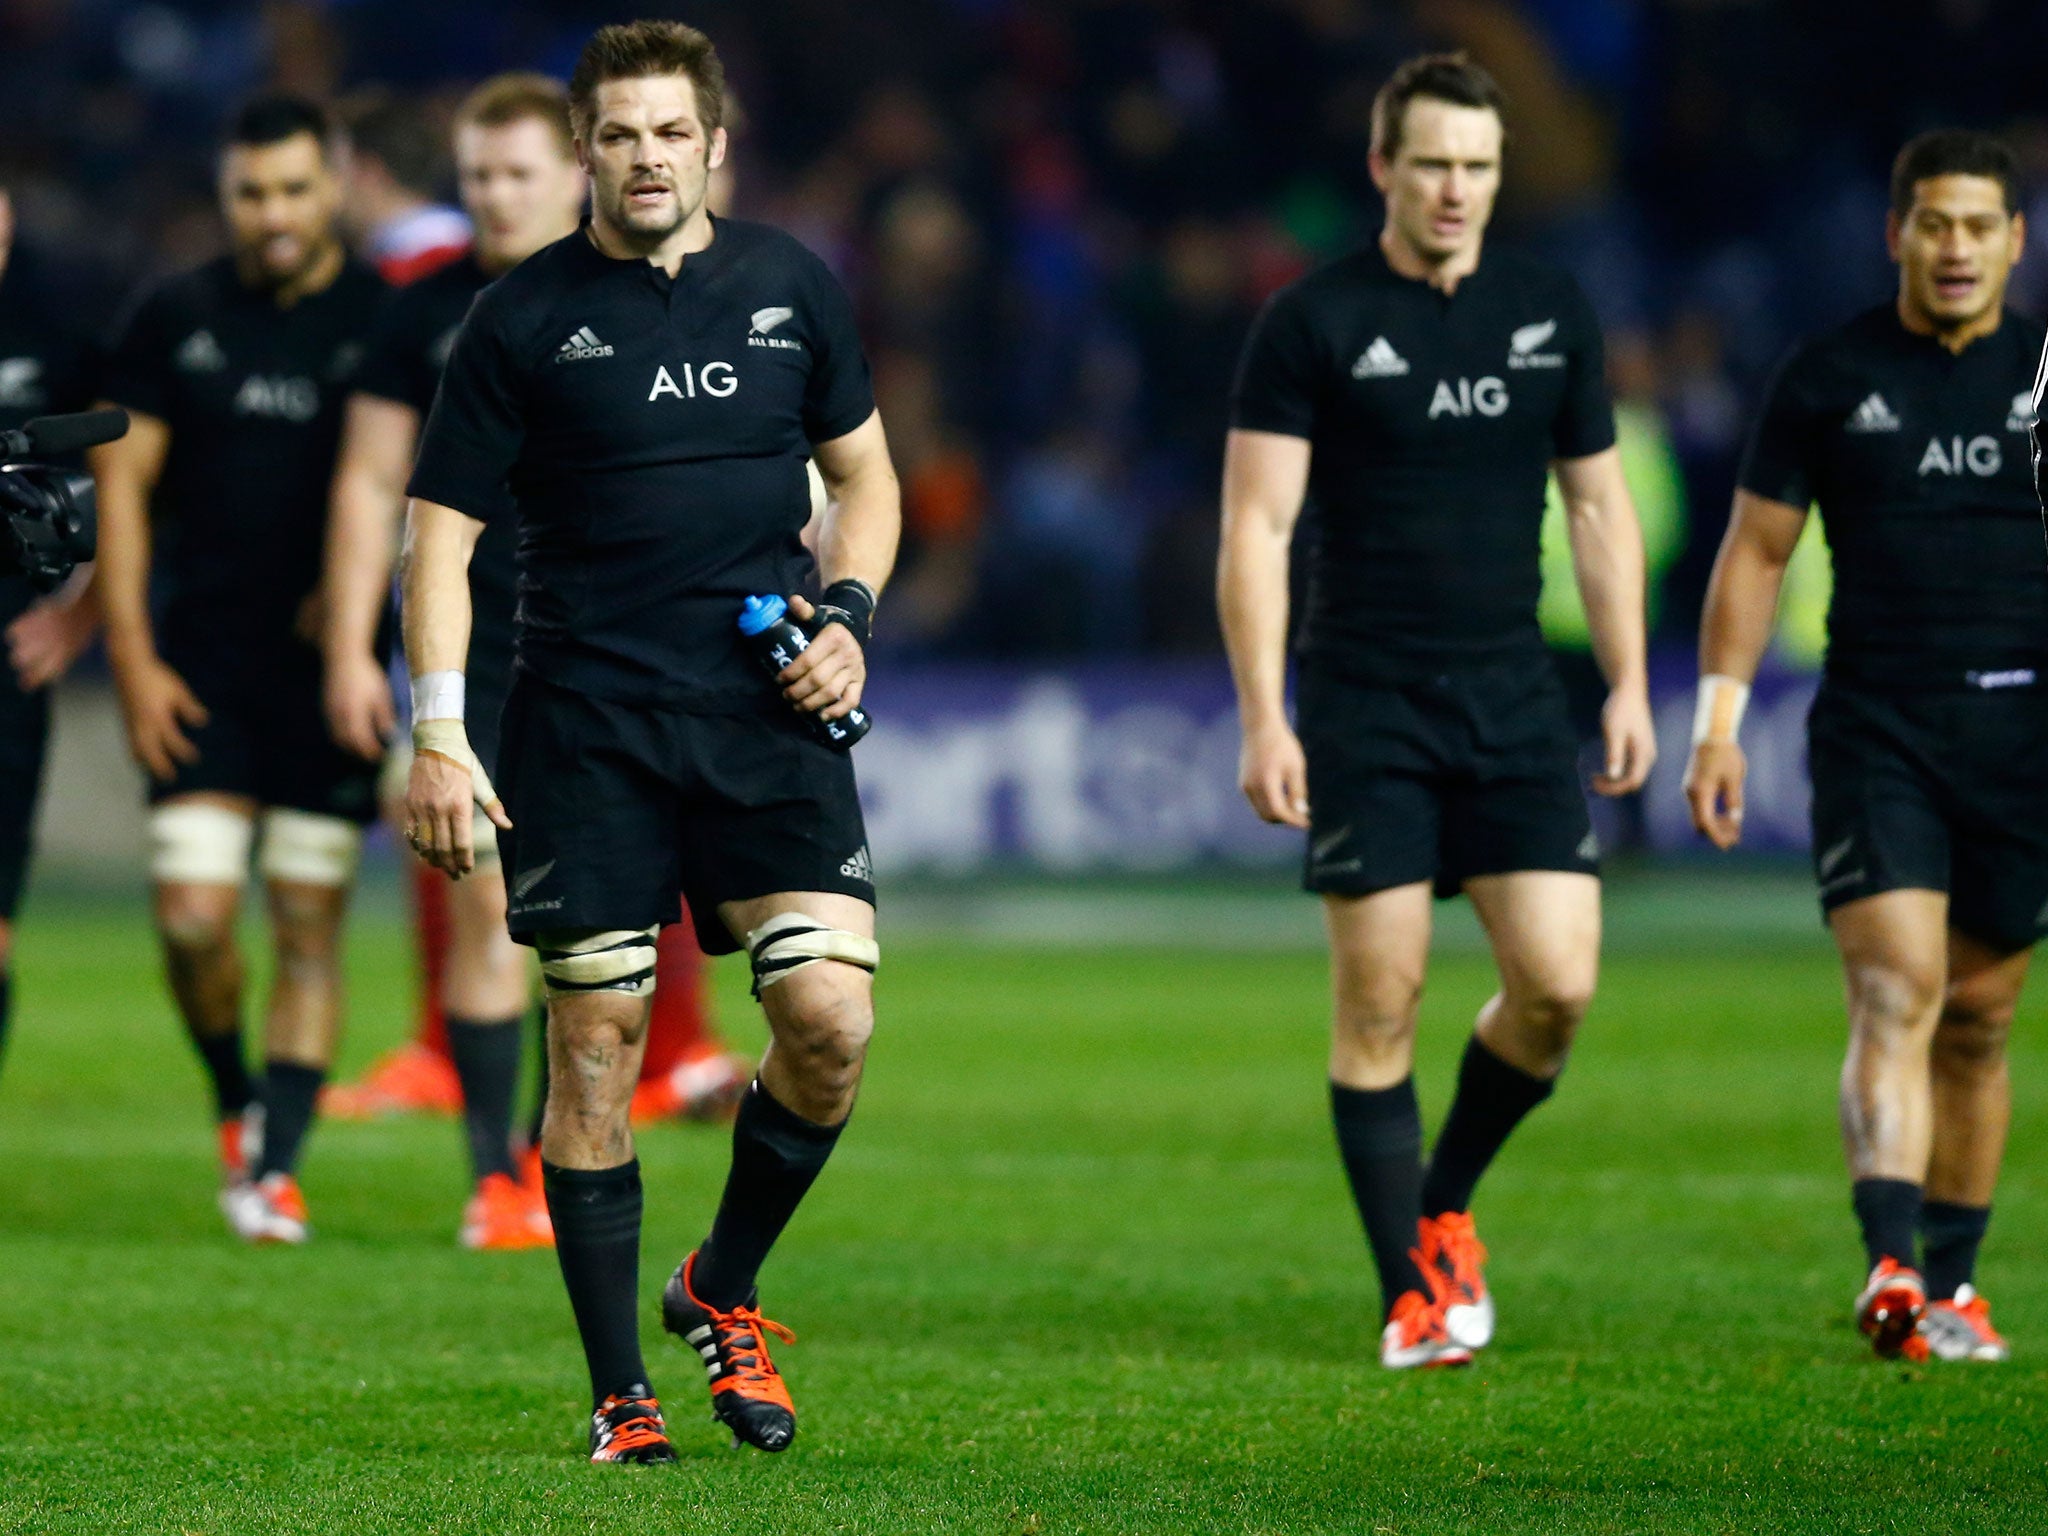 Richie McCaw leads his side off the field